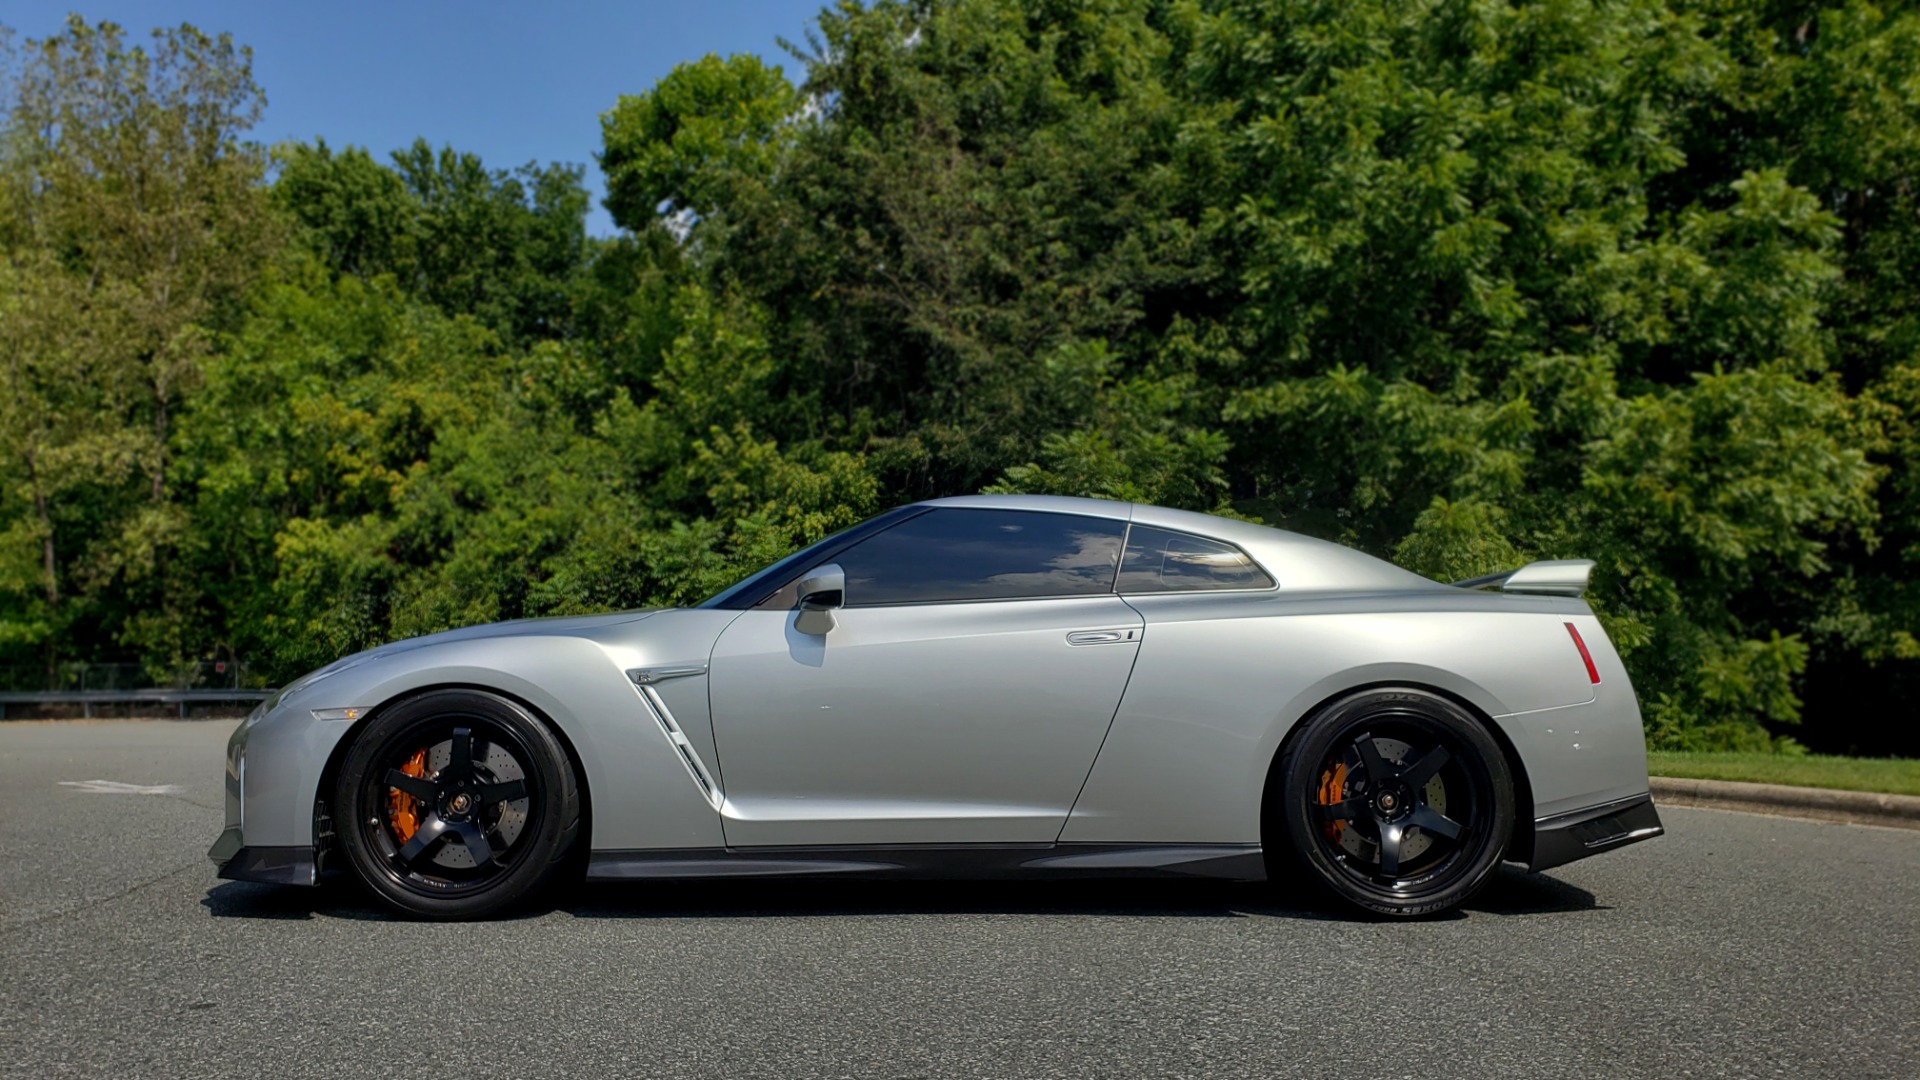 Used 2018 Nissan GT-R PREMIUM / NAV / BOSE / REARVIEW / CUSTOM WHEELS / COIL OVER SHOCKS / TUNED for sale Sold at Formula Imports in Charlotte NC 28227 6